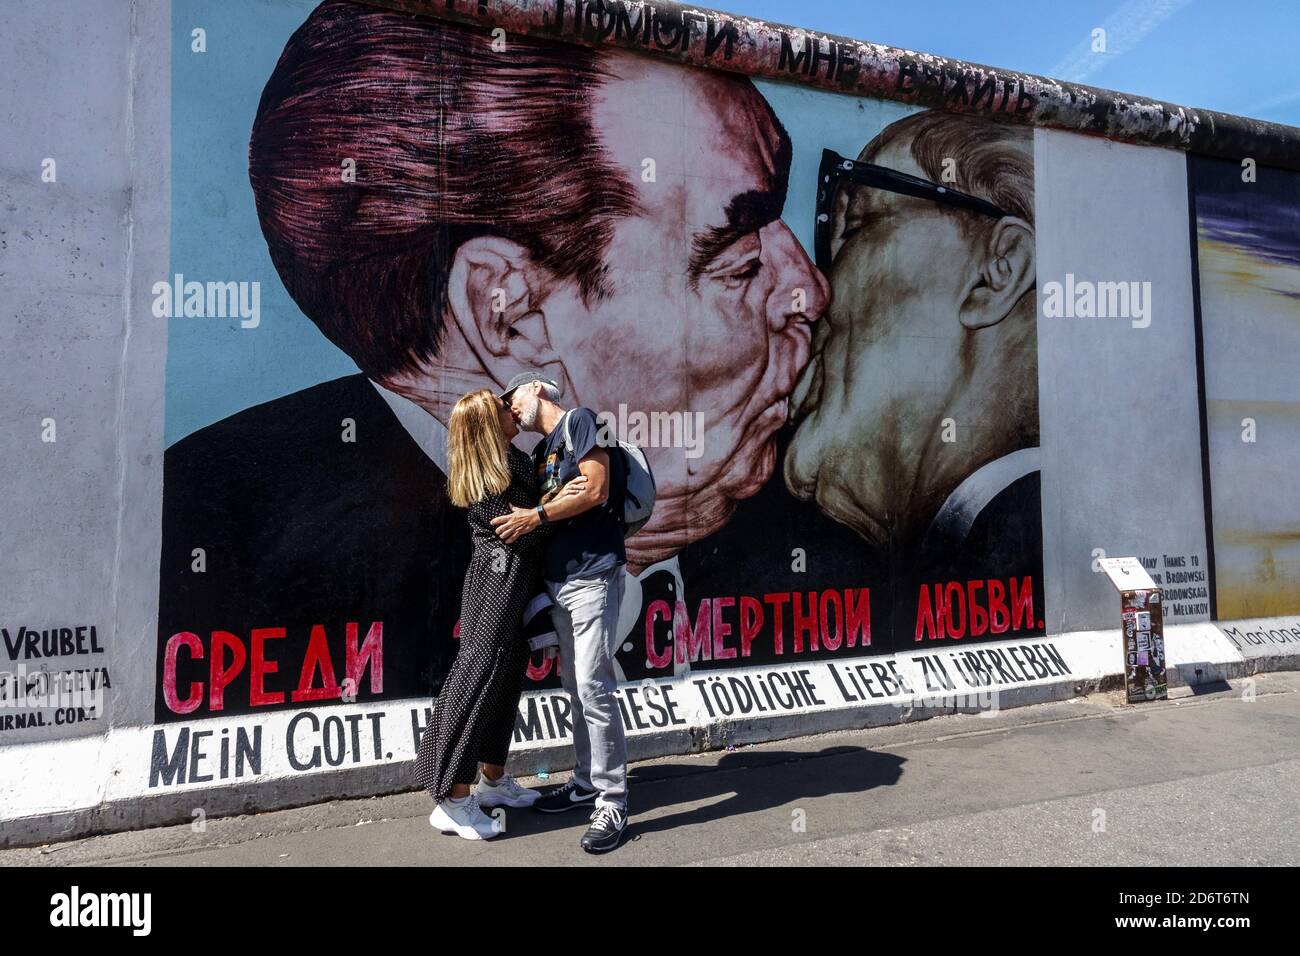 hi-res stock kissing photography Graffiti Alamy - images and